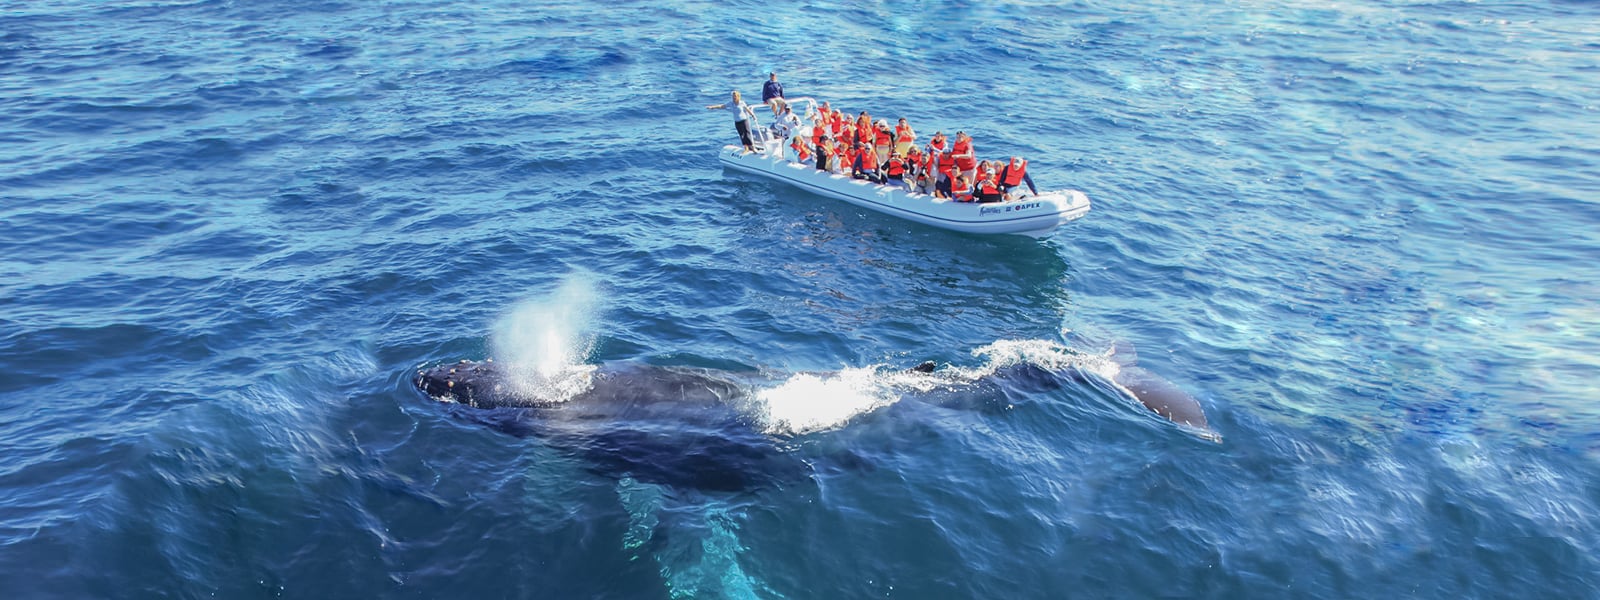 Tour group on a Whale Watching tour in Cabo